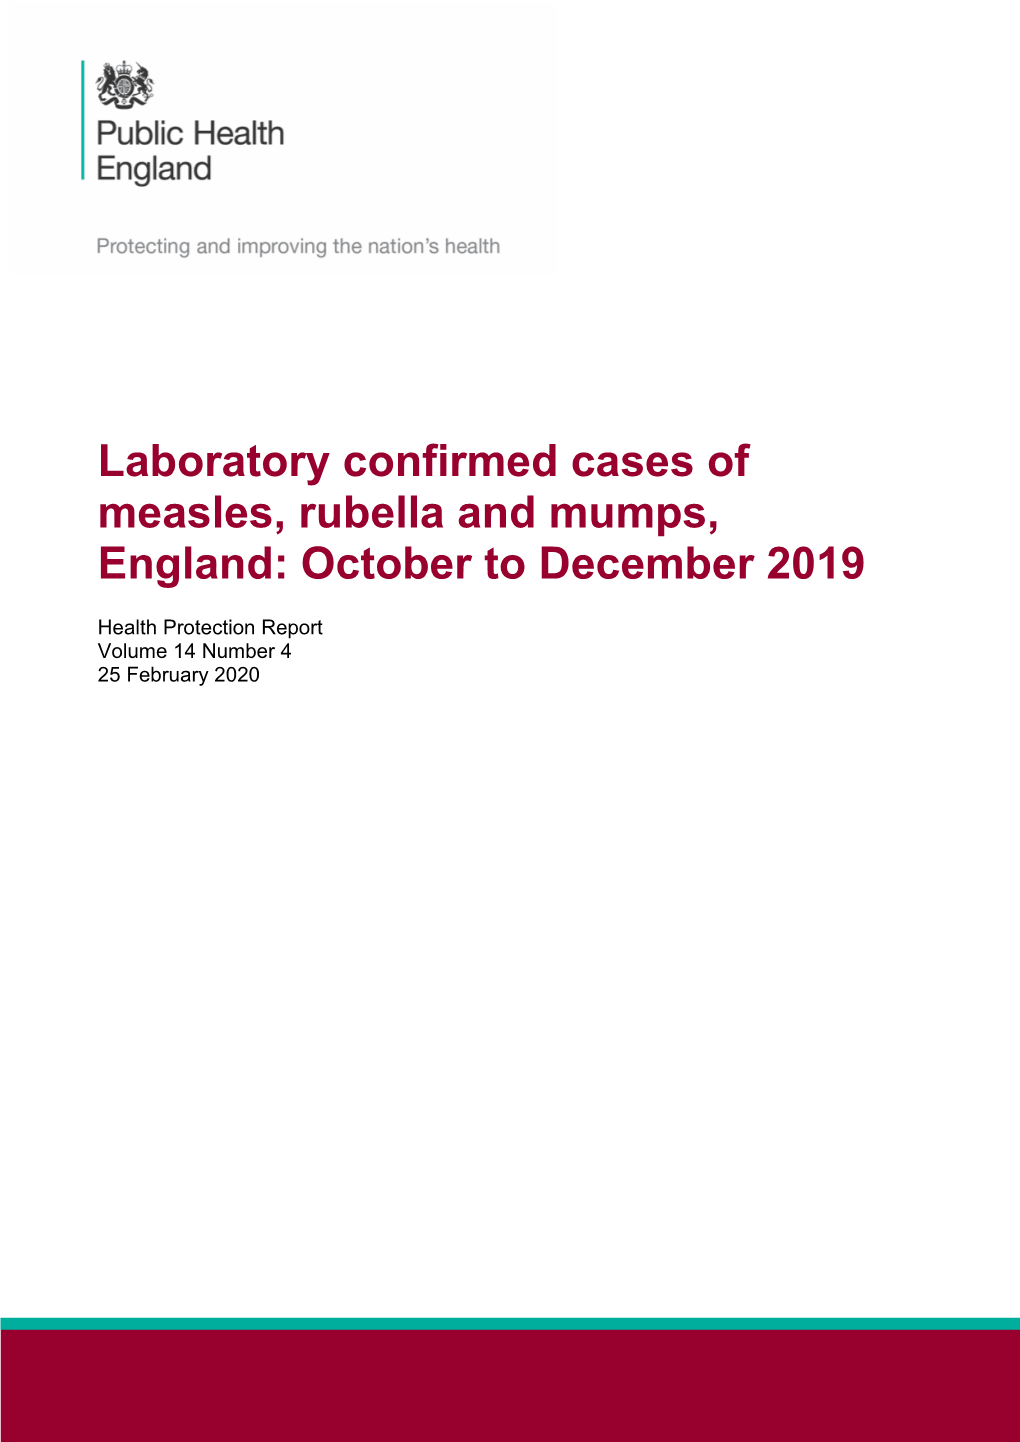 (England): October to December 2019 Health Protection Report Volume 14 Number 4